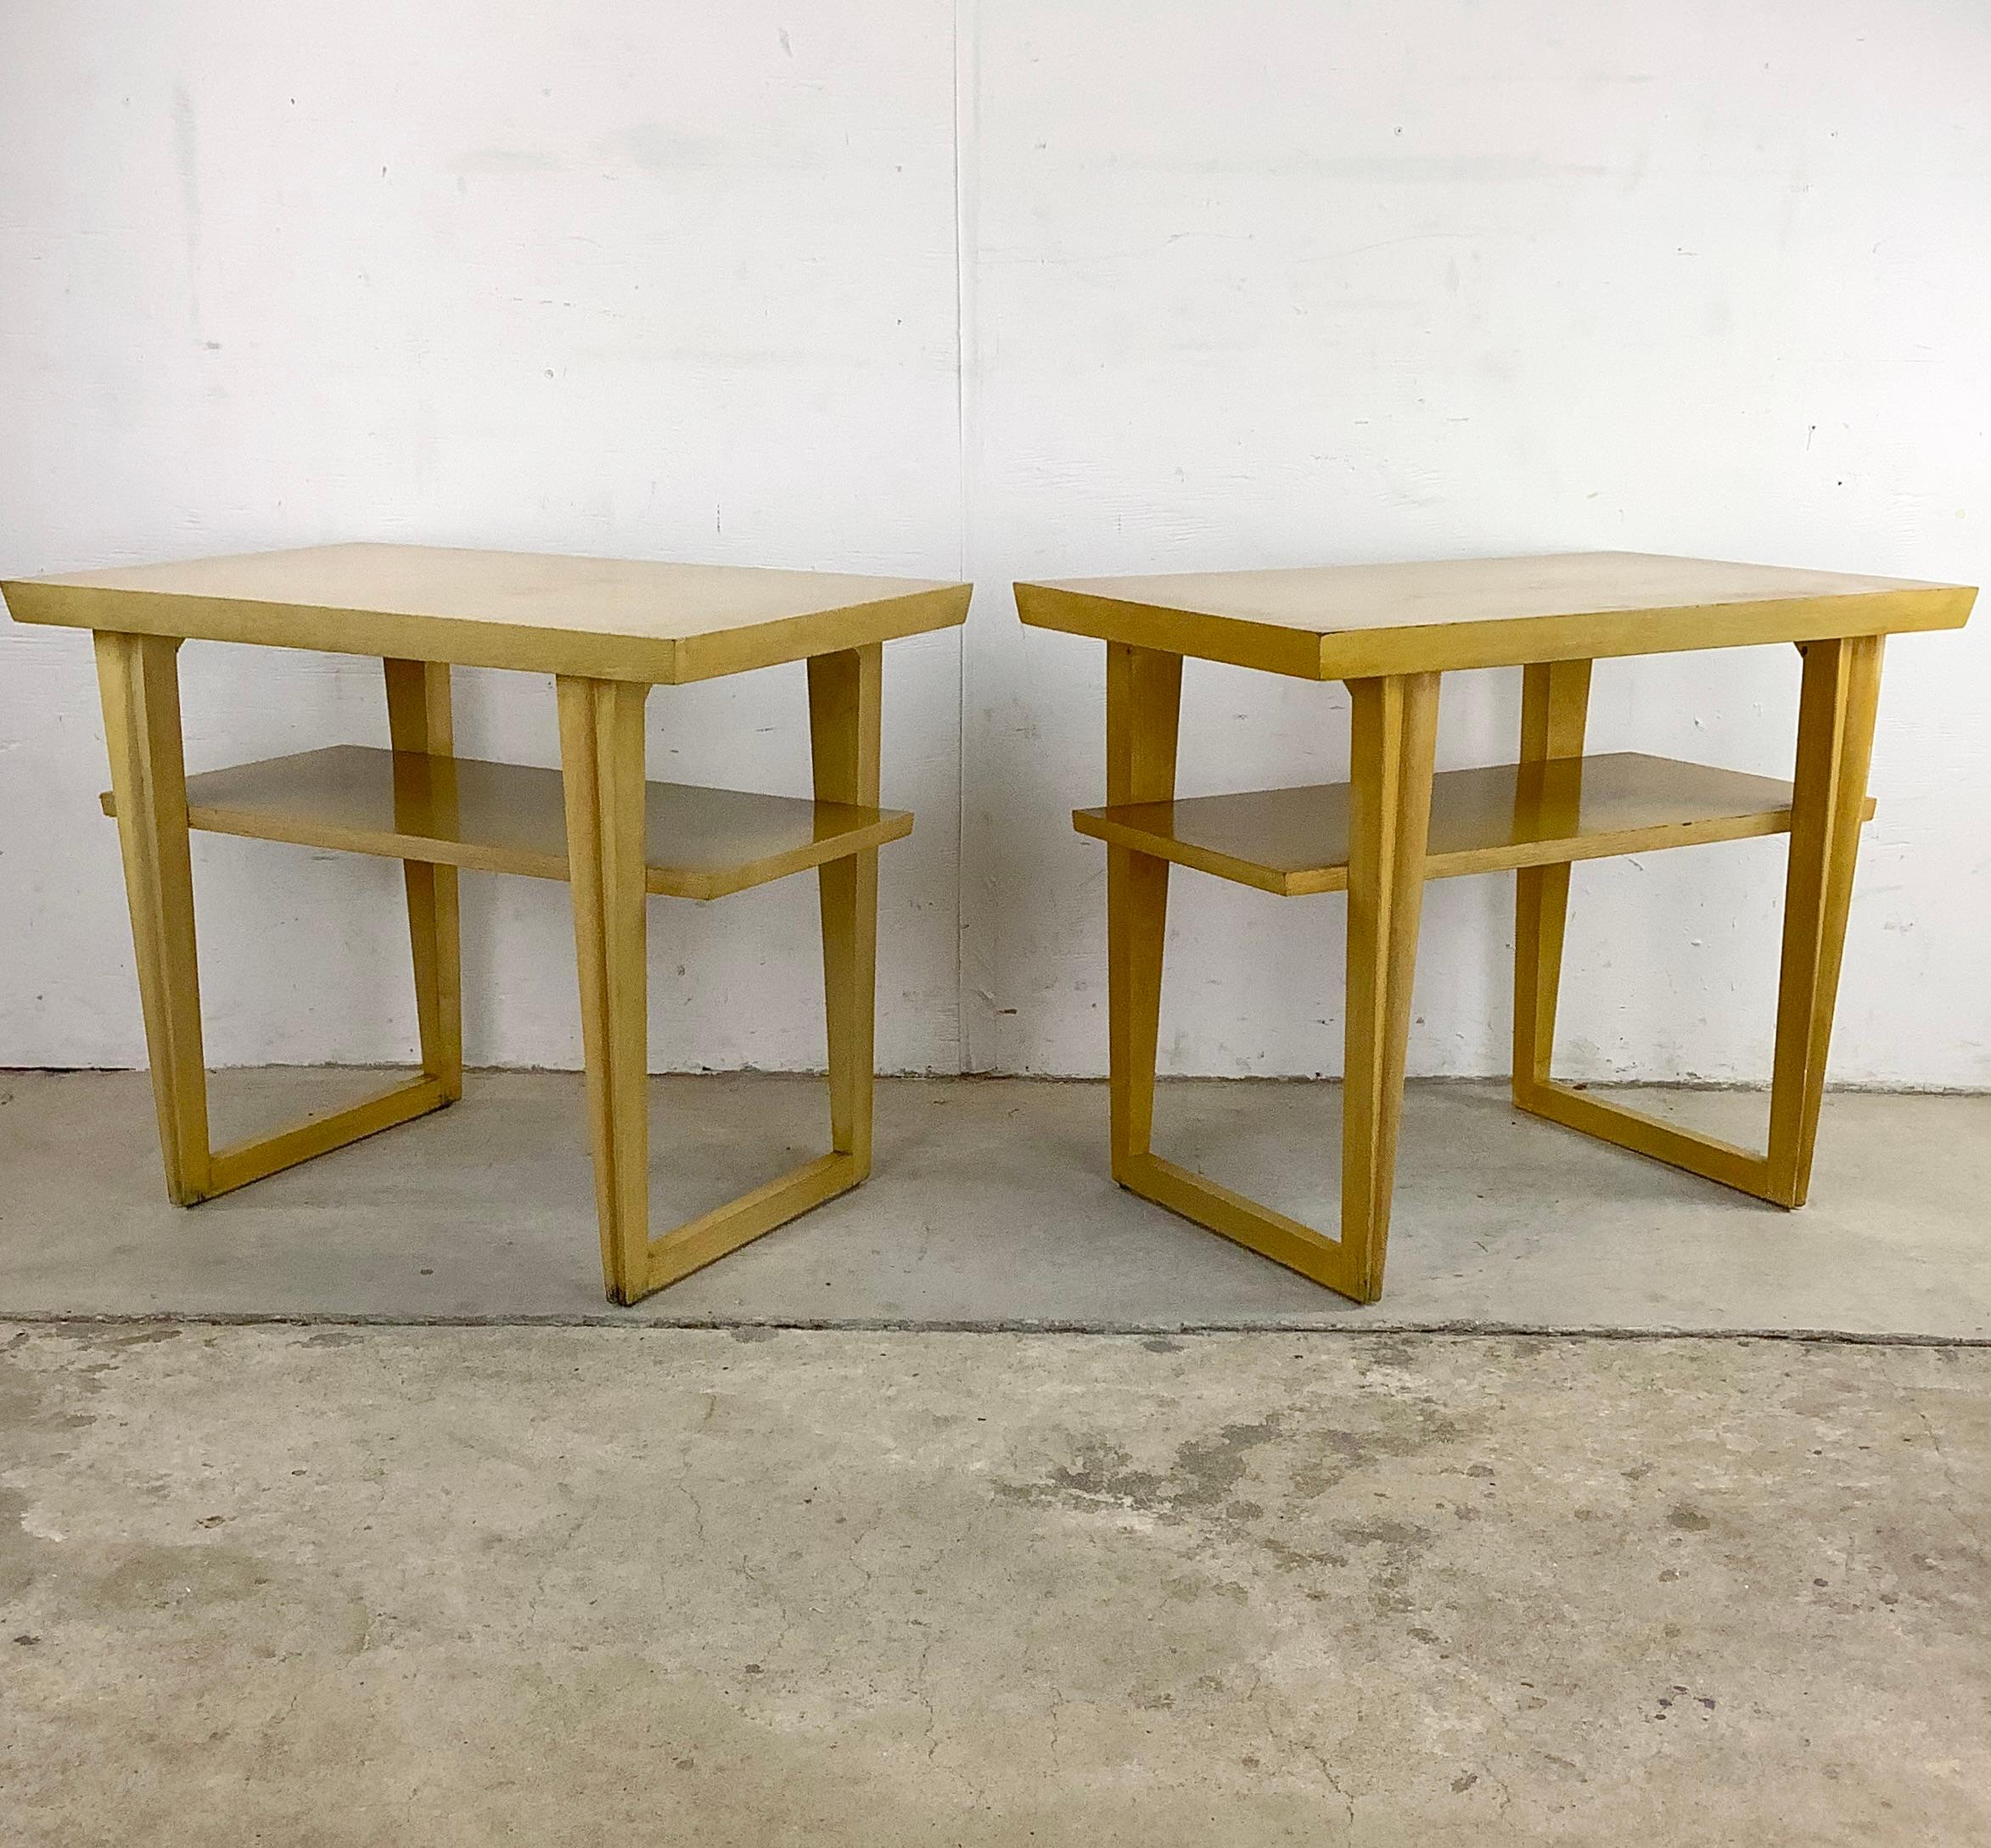 This striking pair of Vintage Modern Side Tables make a stylish and versatile set of end tables that elevate your living space with their timeless appeal. Crafted during the mid-century era, these side tables showcase the iconic design elements that